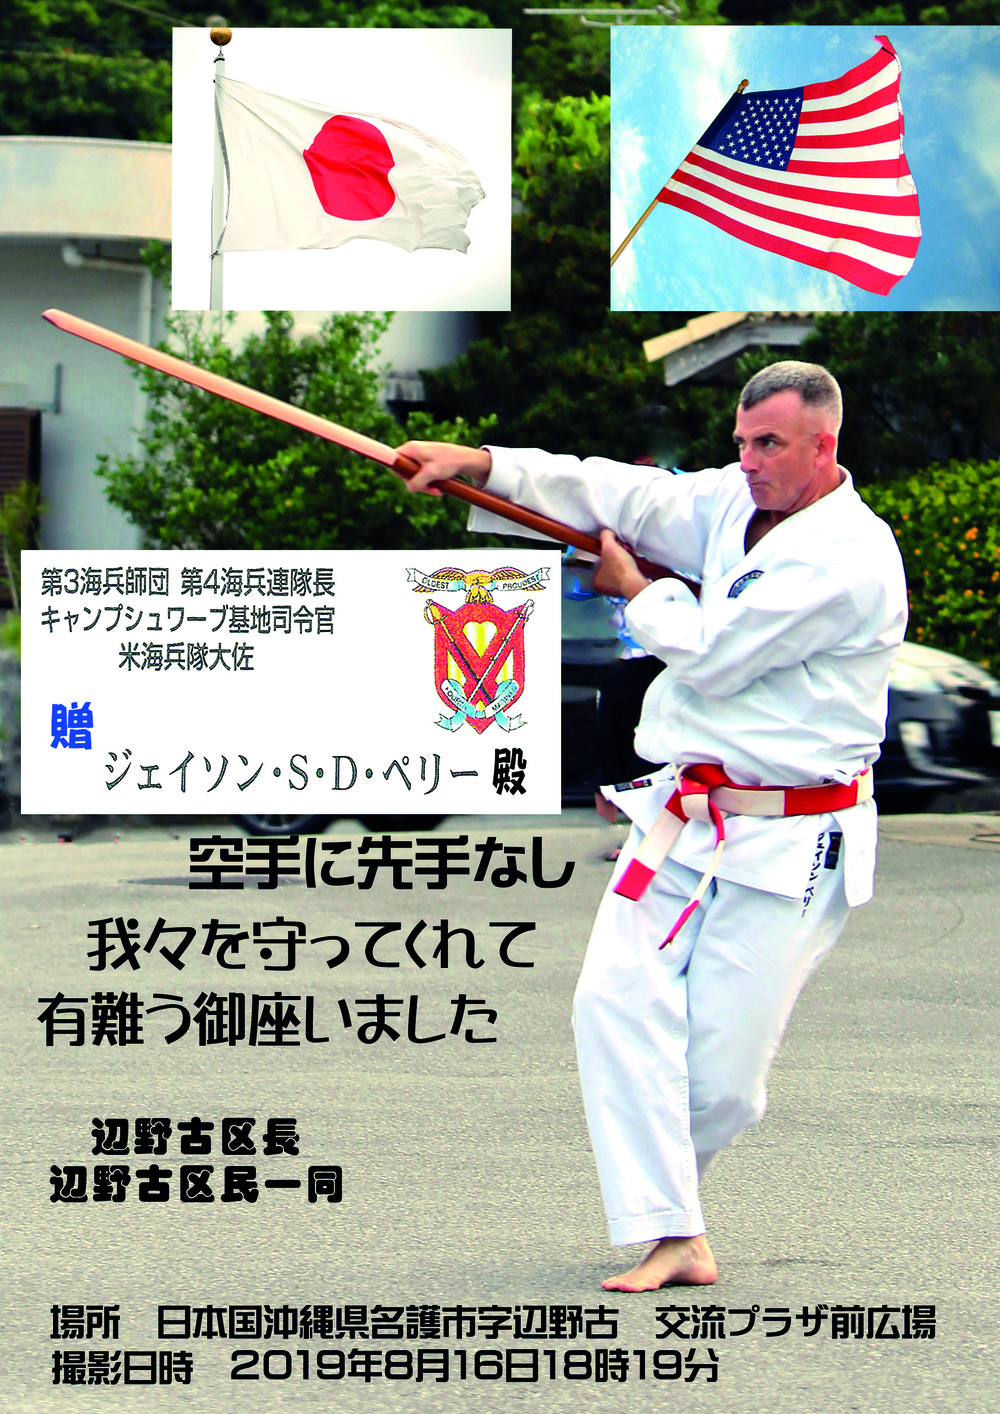 Guided by fate: Marine Karate practitioner respects Okinawa, the root of Karate